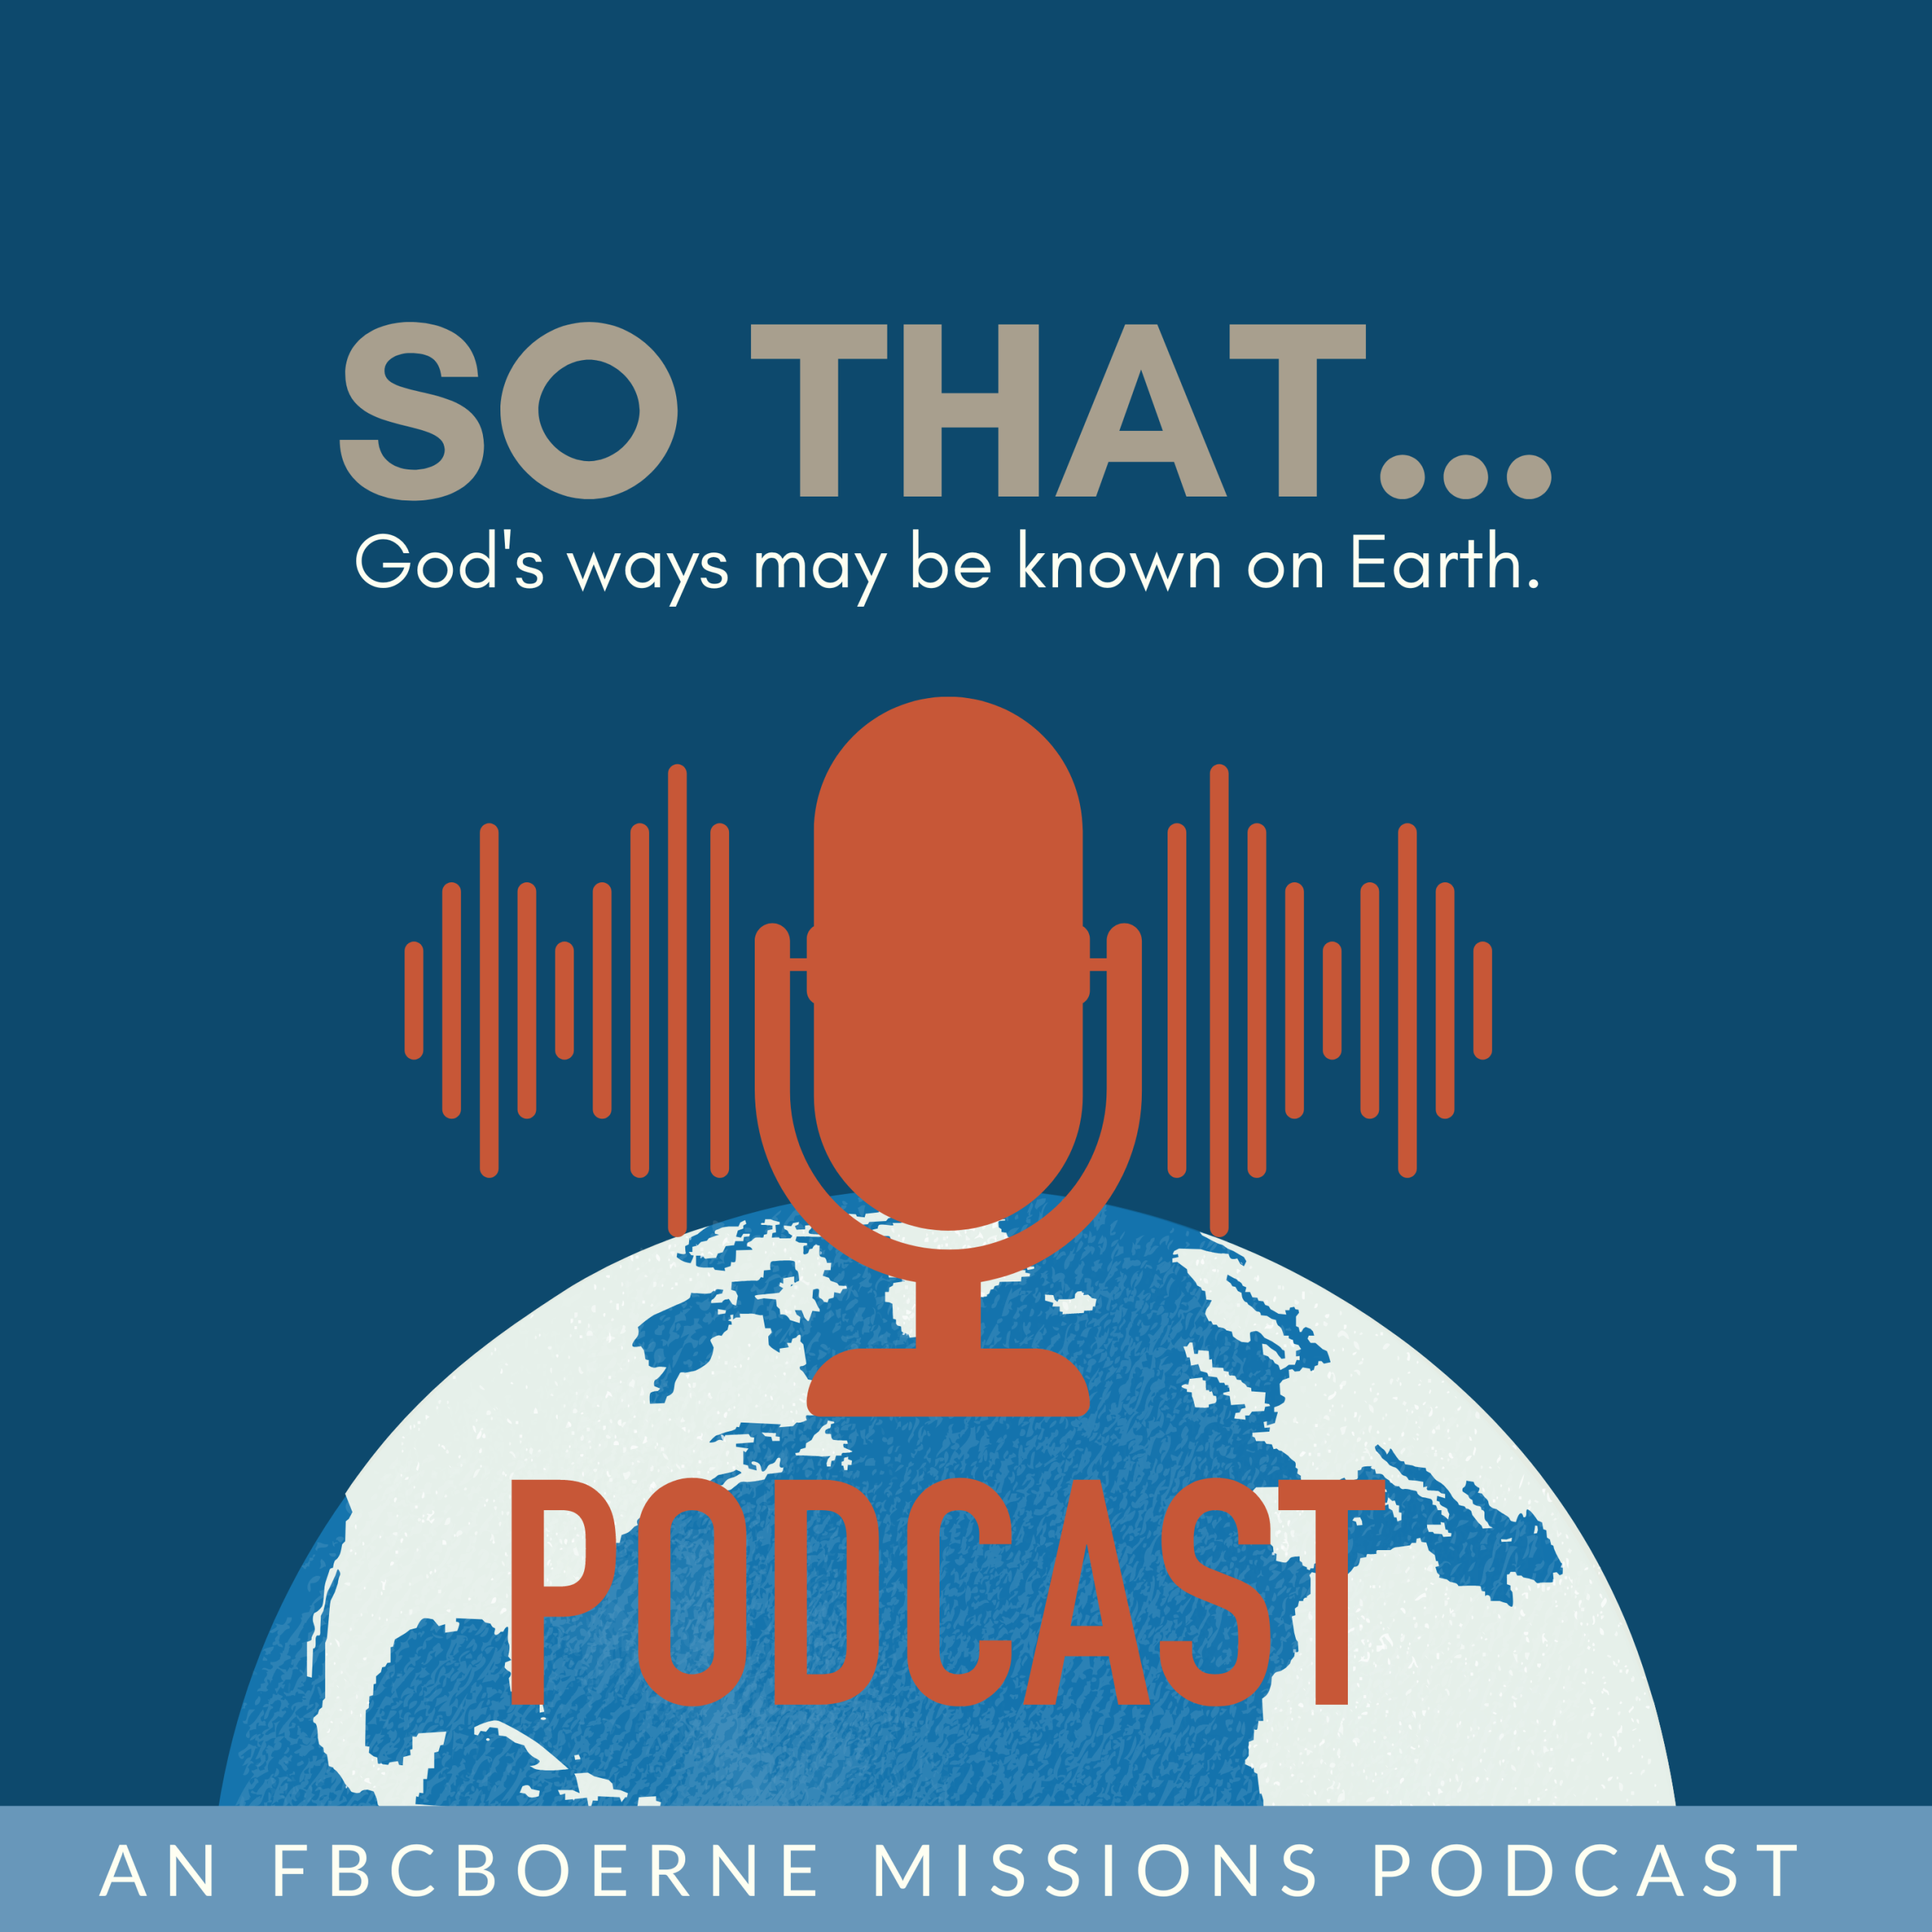 Why do a missions focused podcast? Why do we need stories?